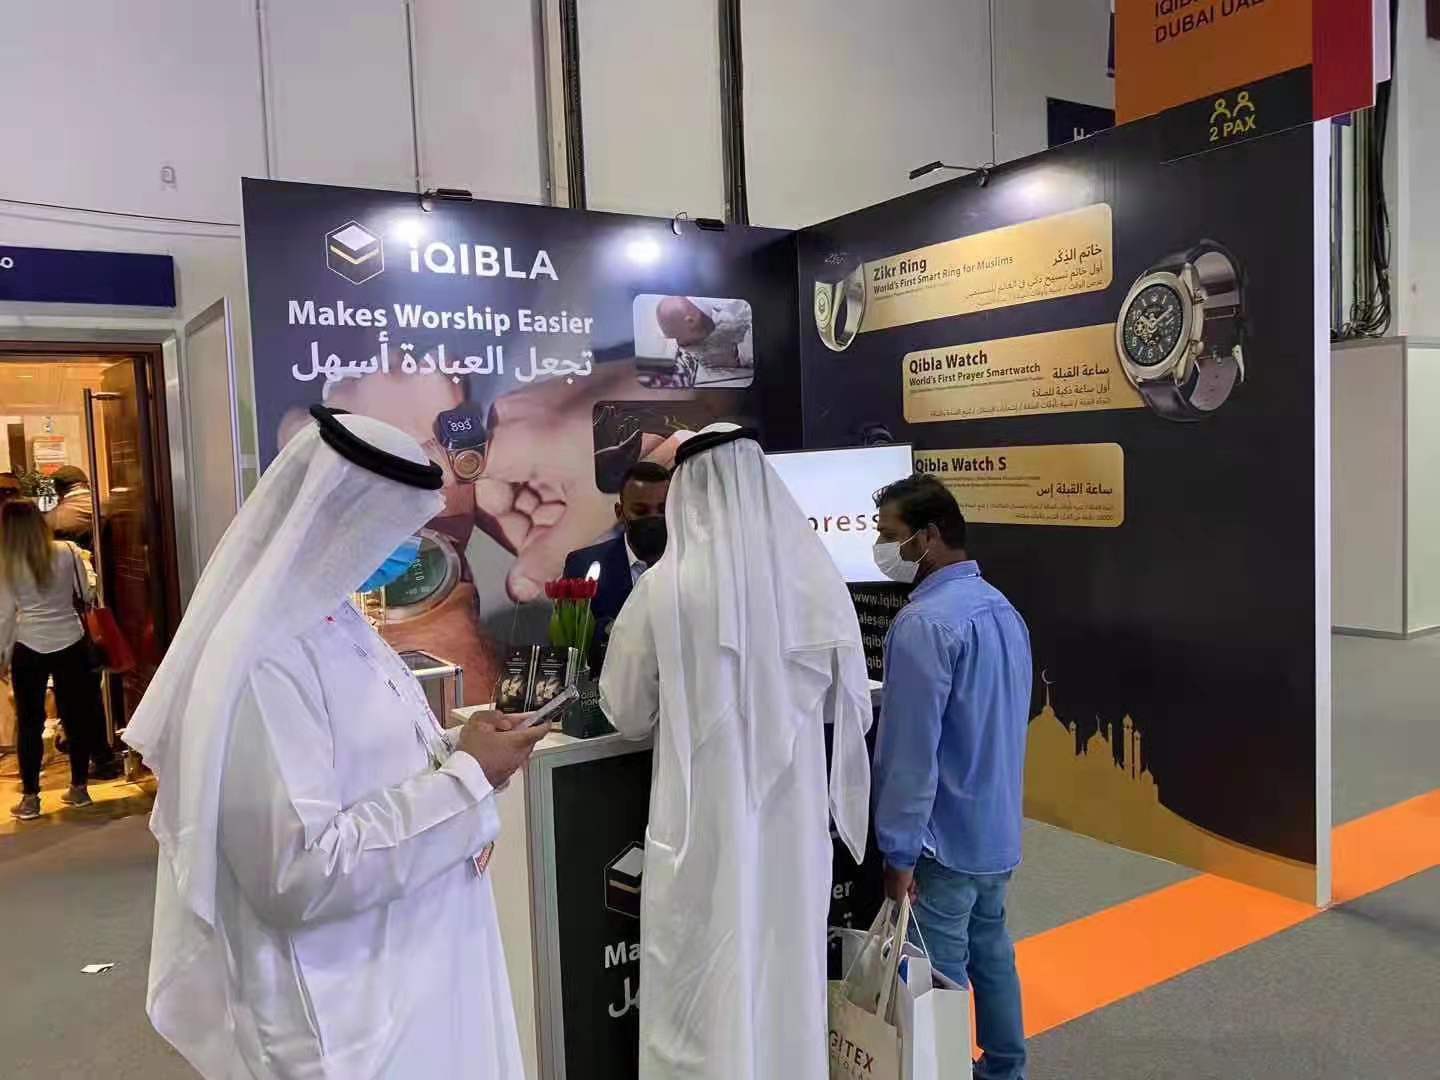 How to Surprise Consumer Electronics? iQibla Dubai gives the answer at GITEX